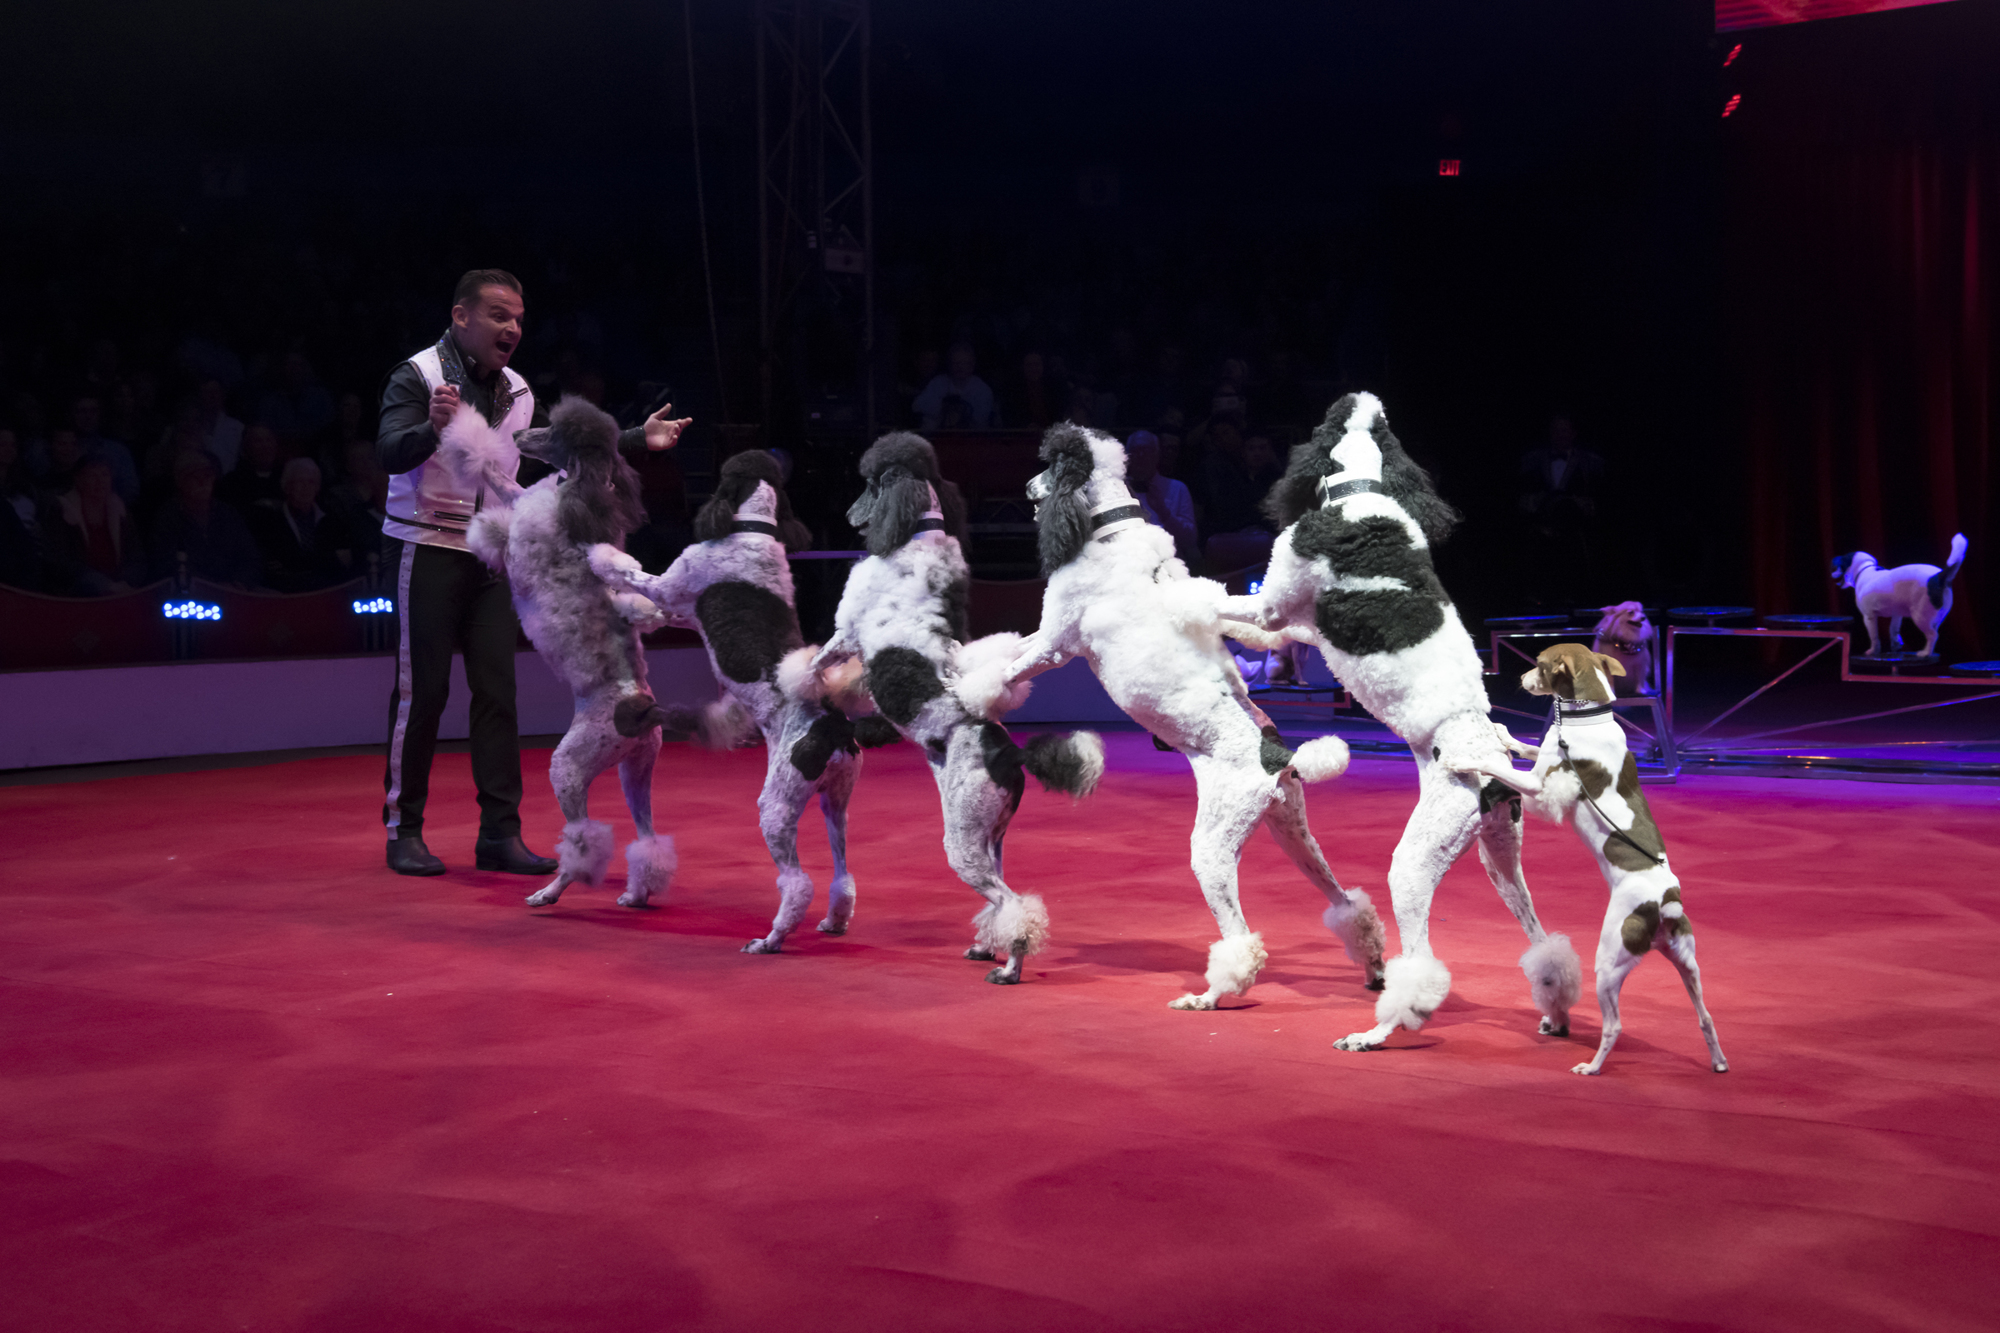 Hans Klose owns 20 dogs, 12 of which will perform in Circus Sarasota 2019. Photo by Cliff Role